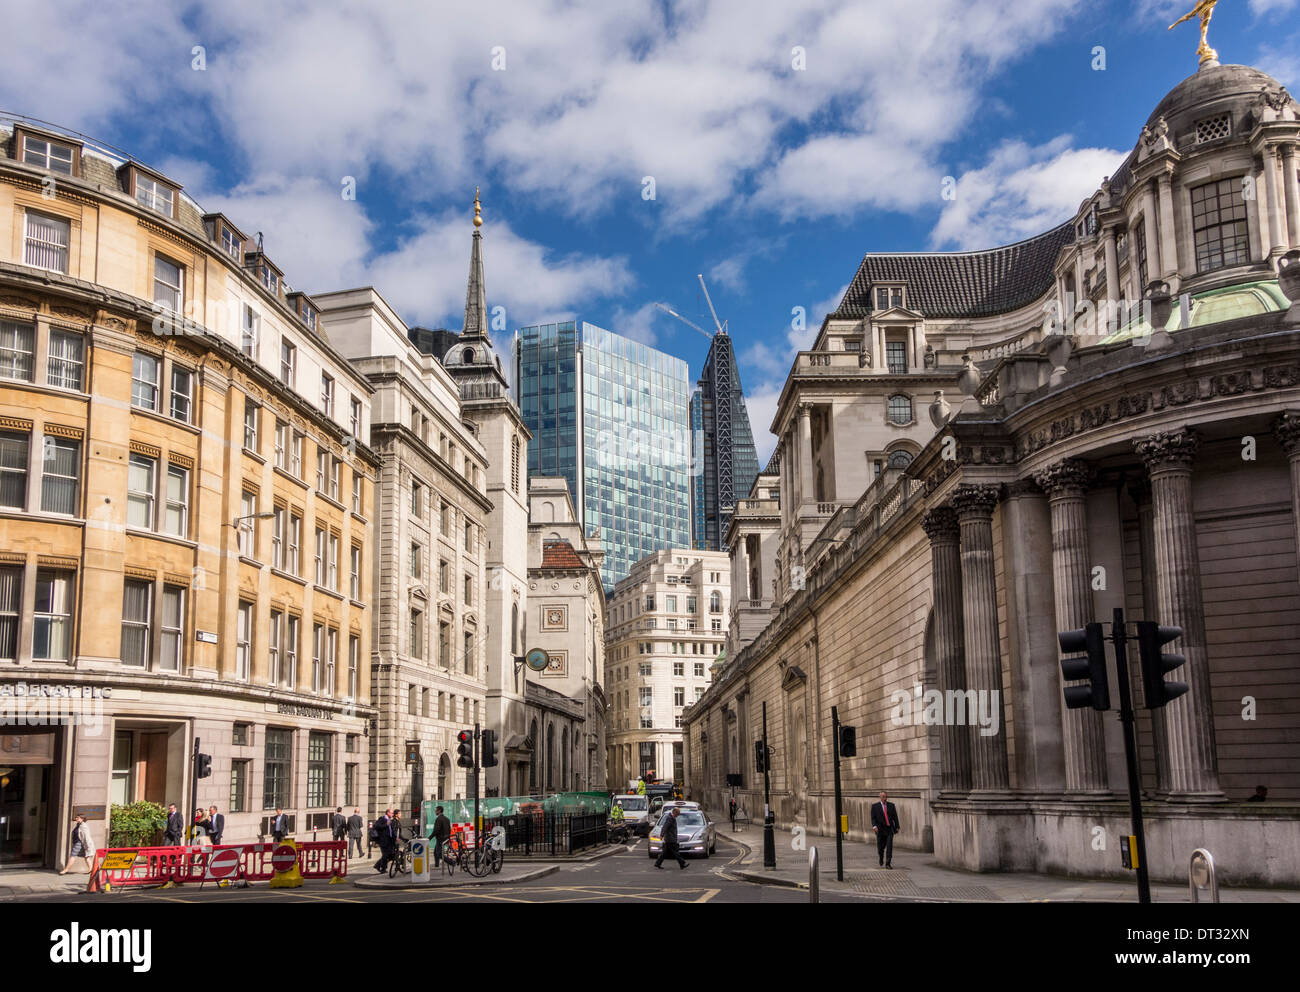 Juxtaposition of old and new architecture in the City of London, UK Stock Photo